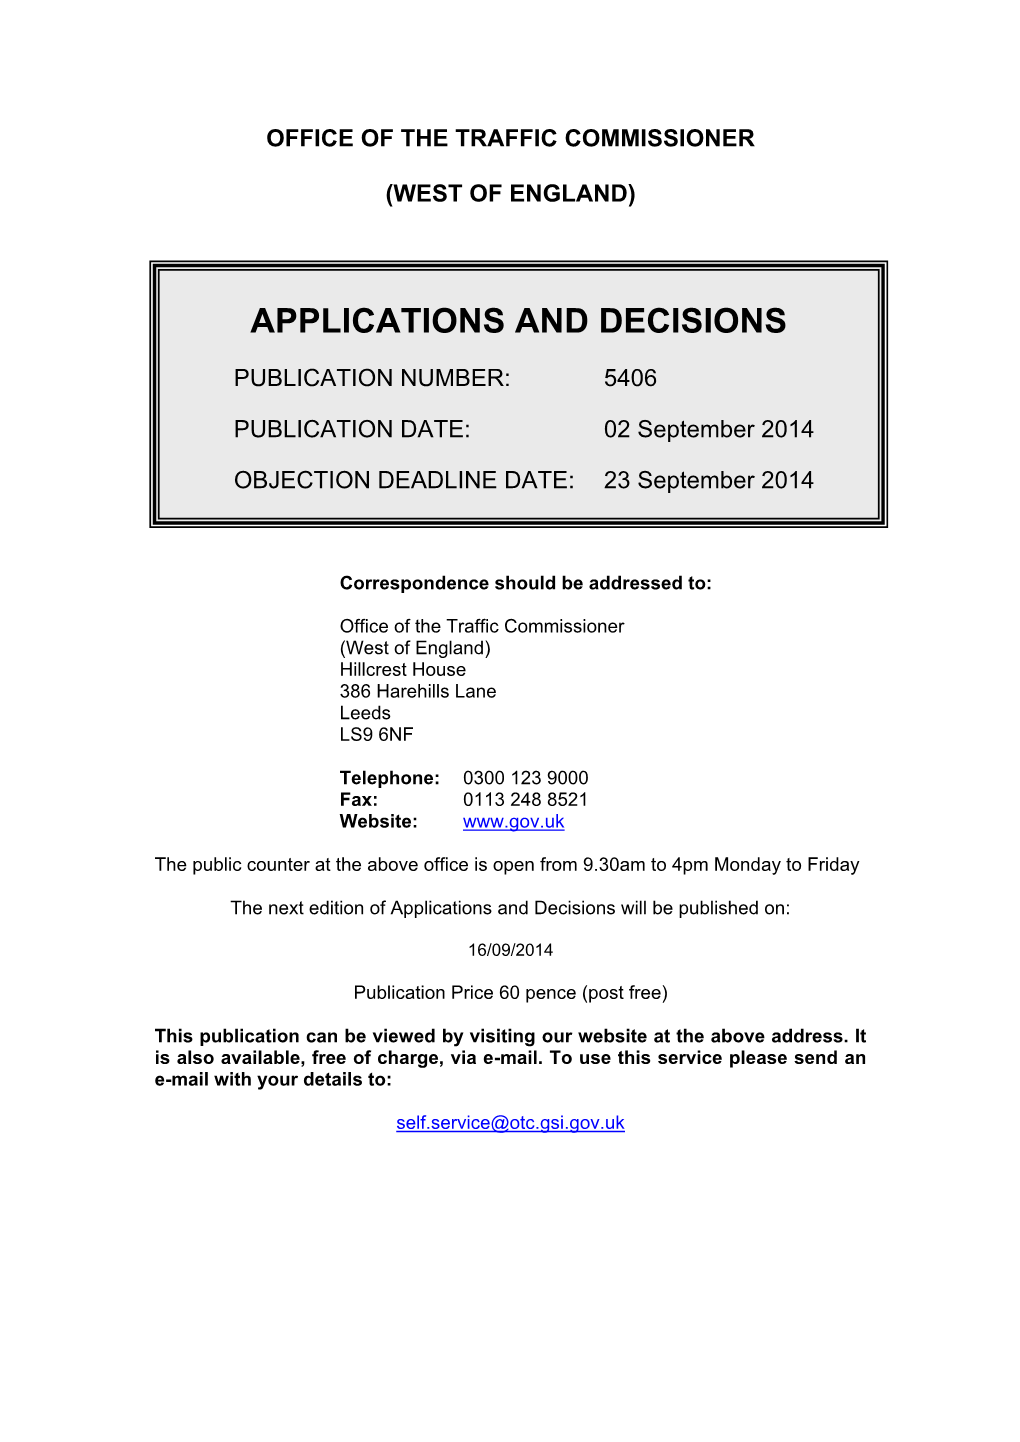 Applications and Decisions: West of England: 2 September 2014